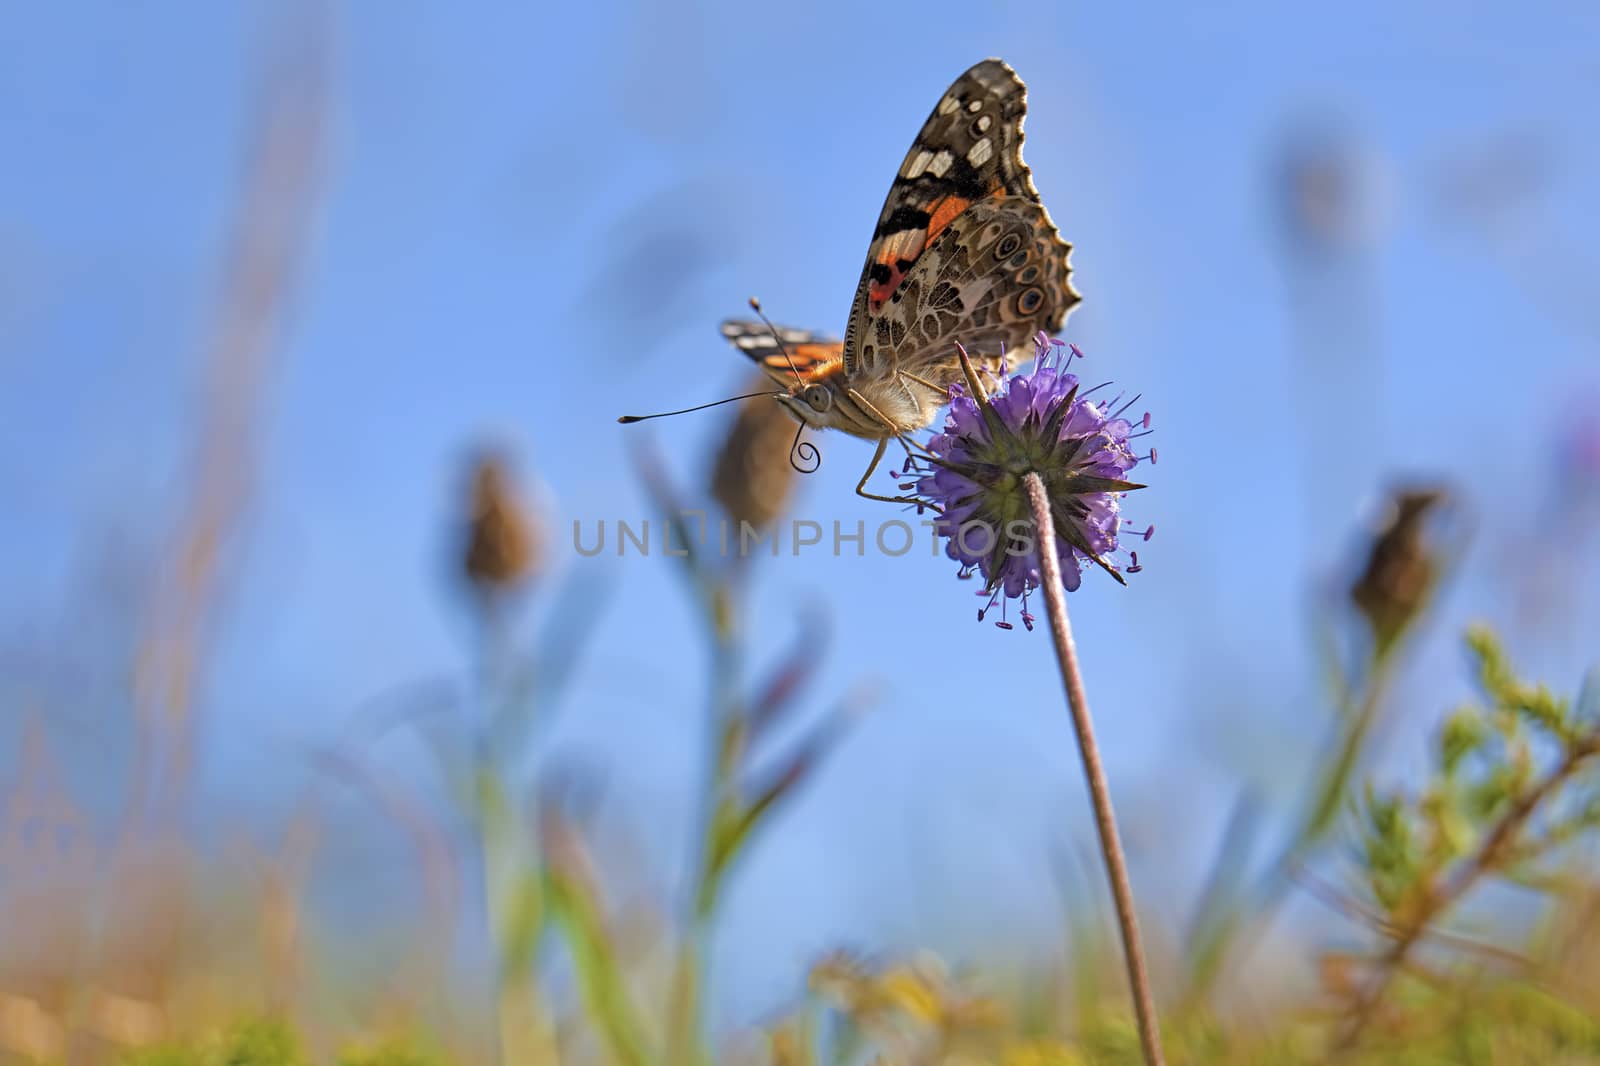 Painted Lady butterfly by kjorgen